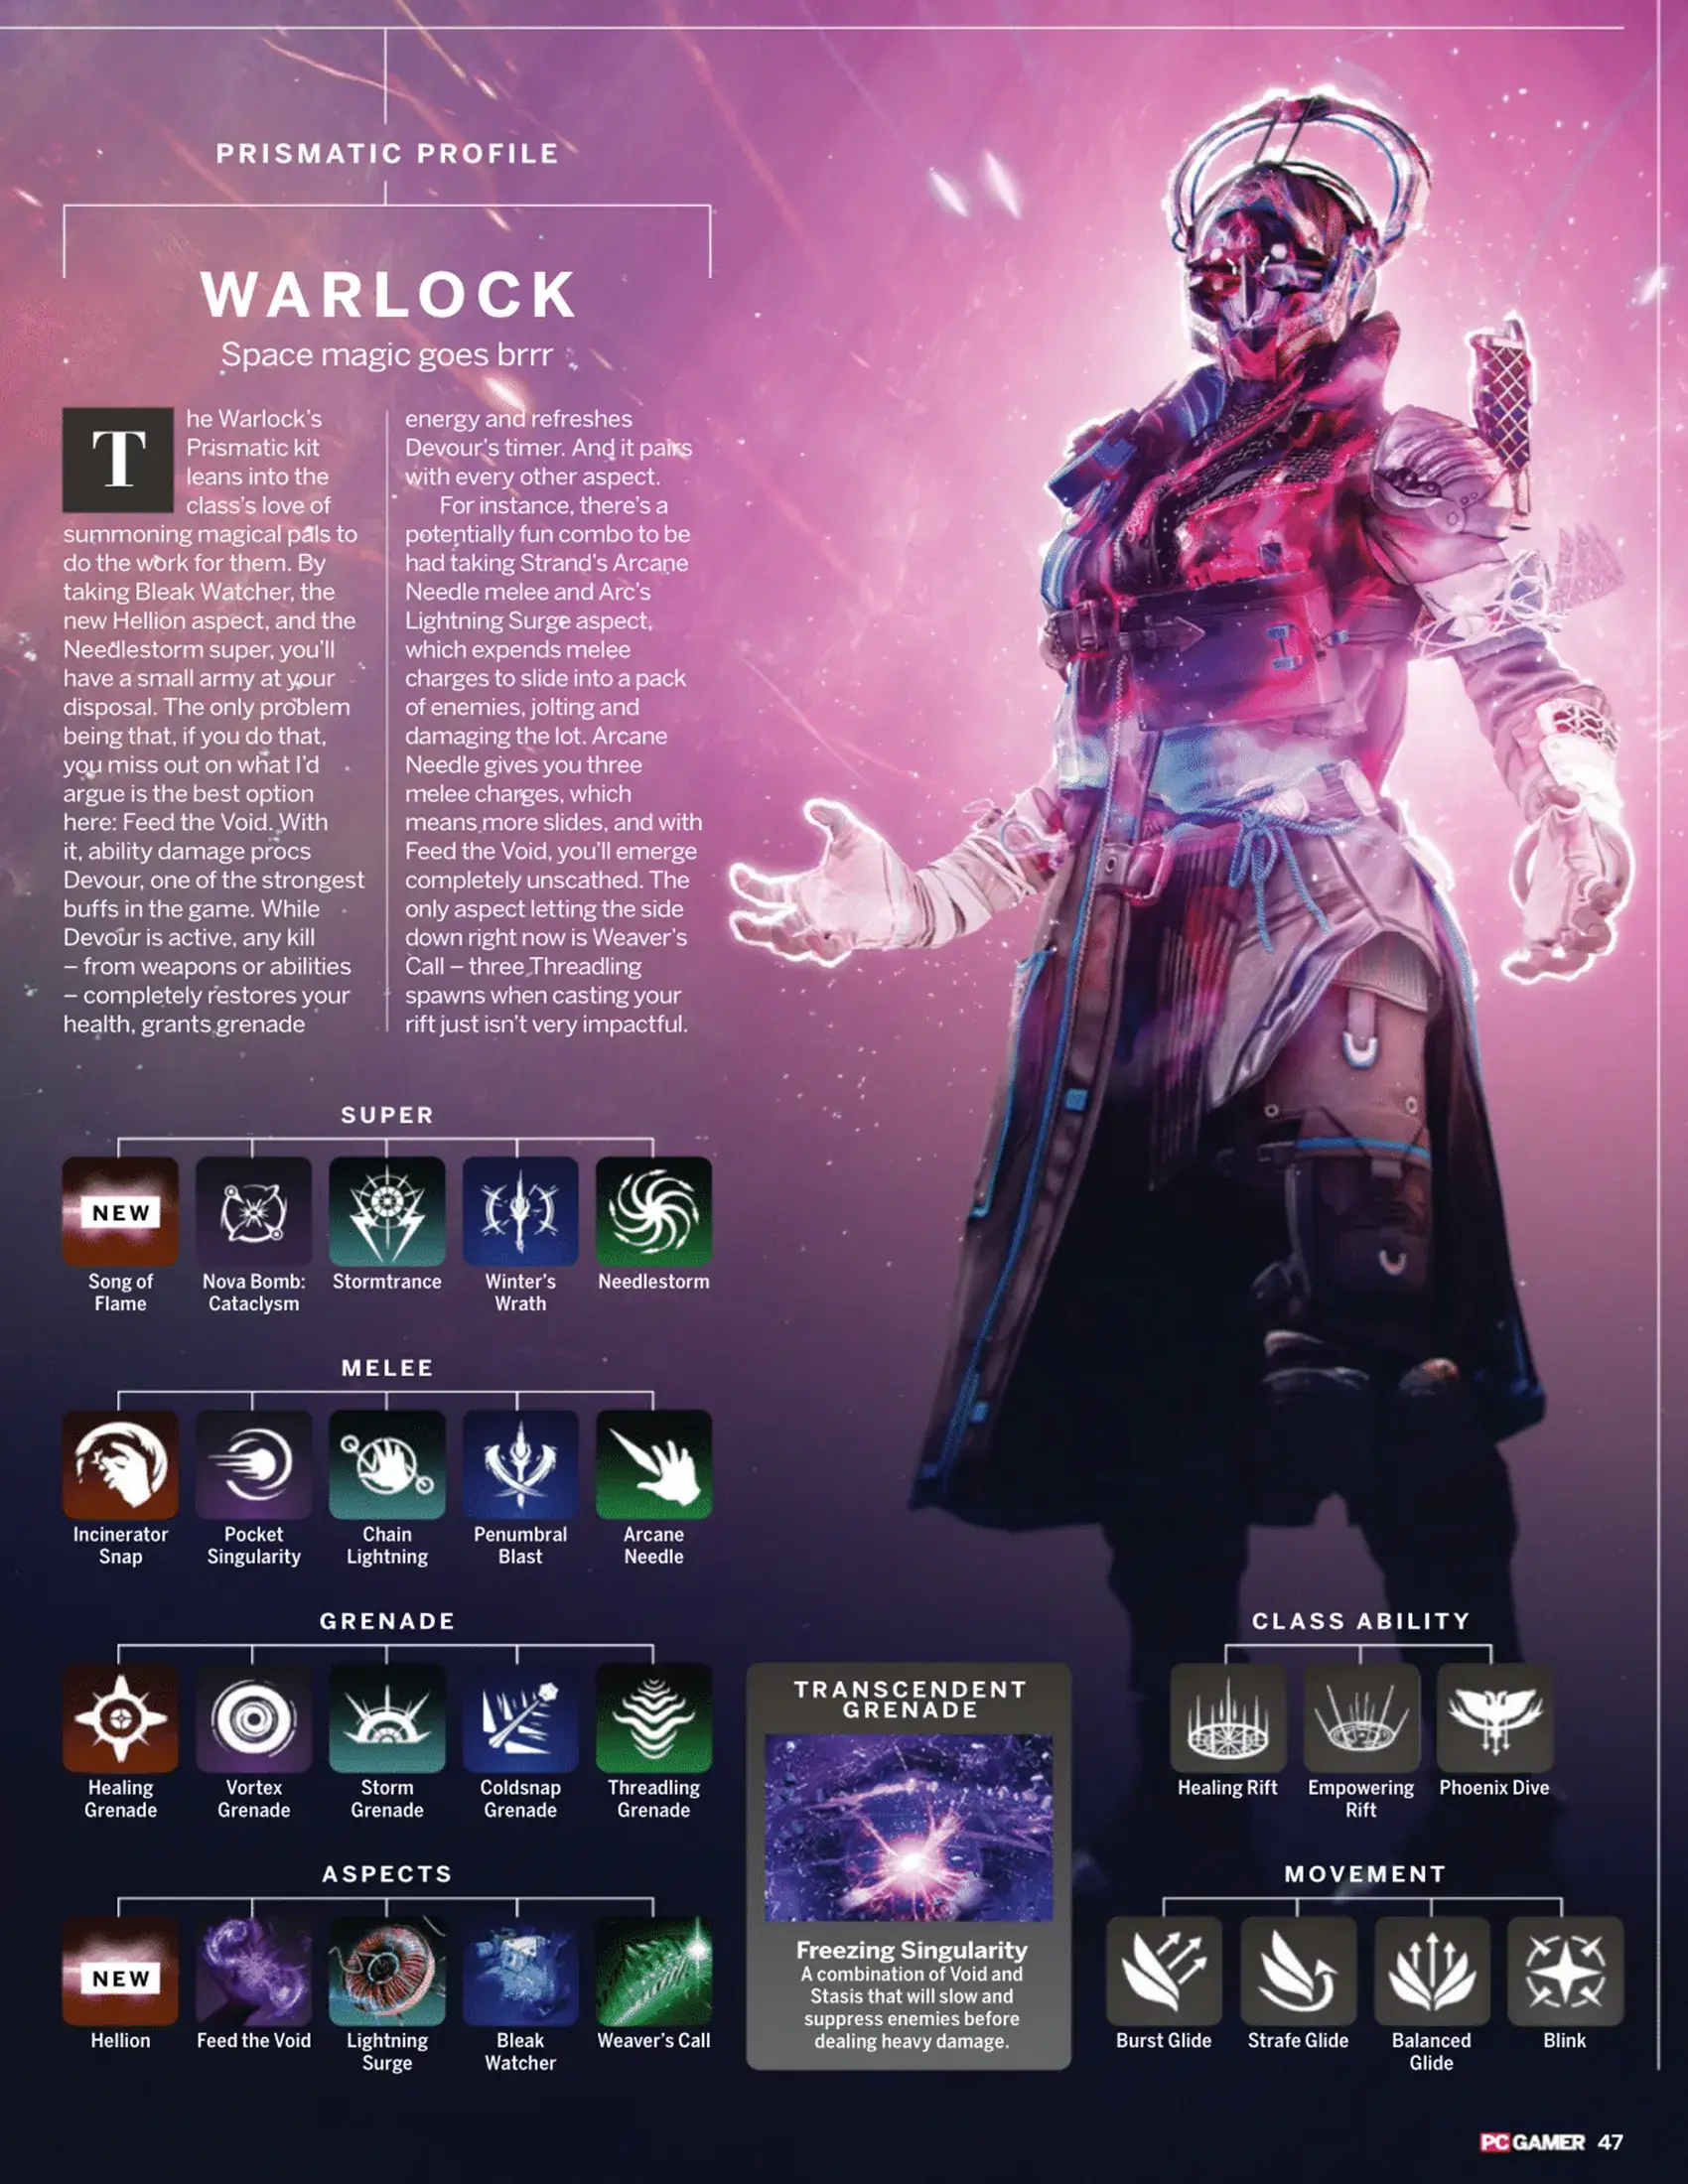 Destiny 2 Warlock Prismatic Subclass Overview Graphic The Final Shape